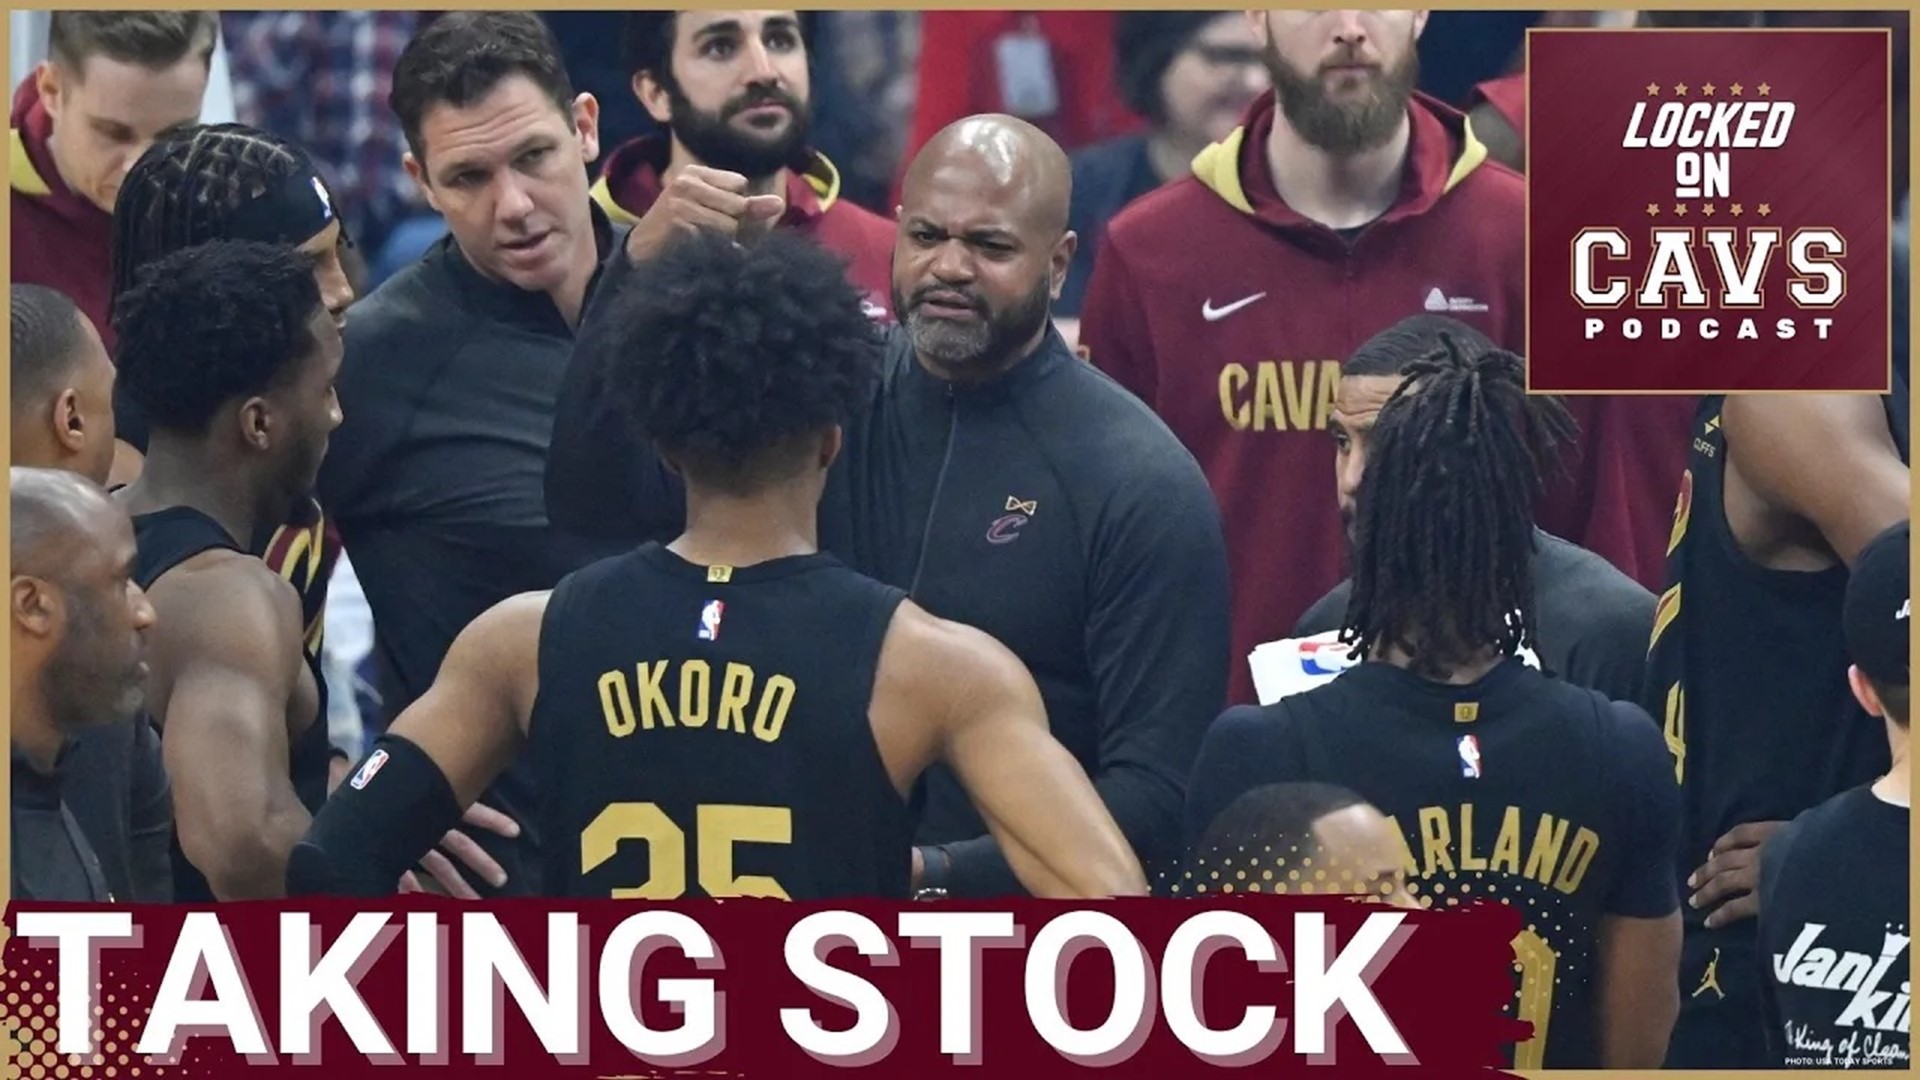 Chris Manning and Evan Dammarell talk about where the Cavs are at after losing the 76ers on Wednesday, how the Cavs defended Joel Embiid, if the Cavs played well in